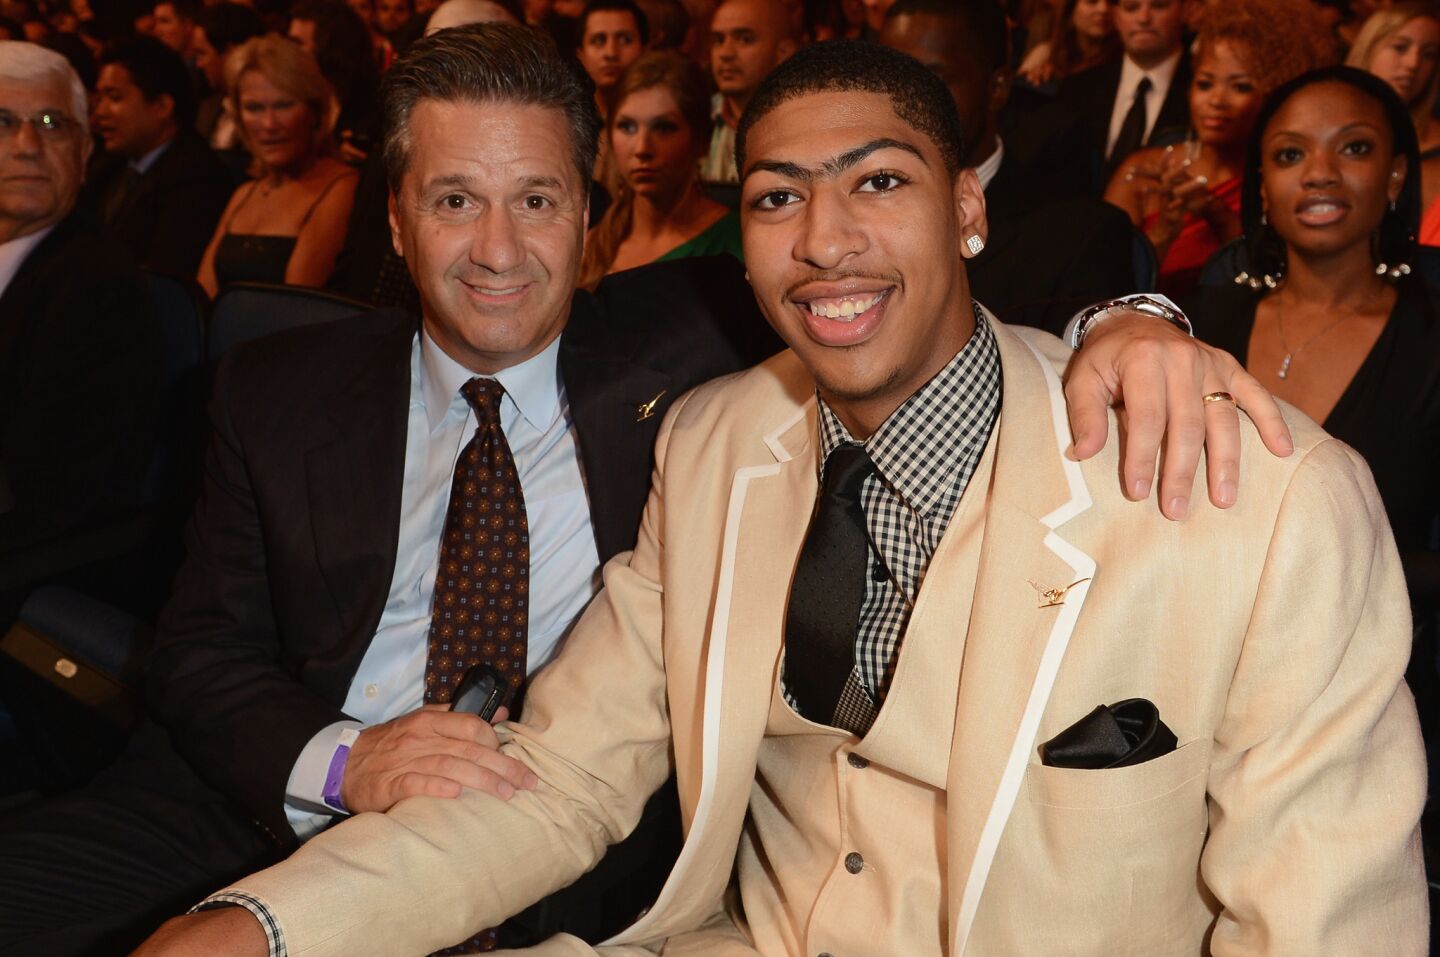 Kentucky coach John Calipari and Anthony Davis in the audience during the 2012 ESPY Awards at Nokia Theatre on July 11, 2012.